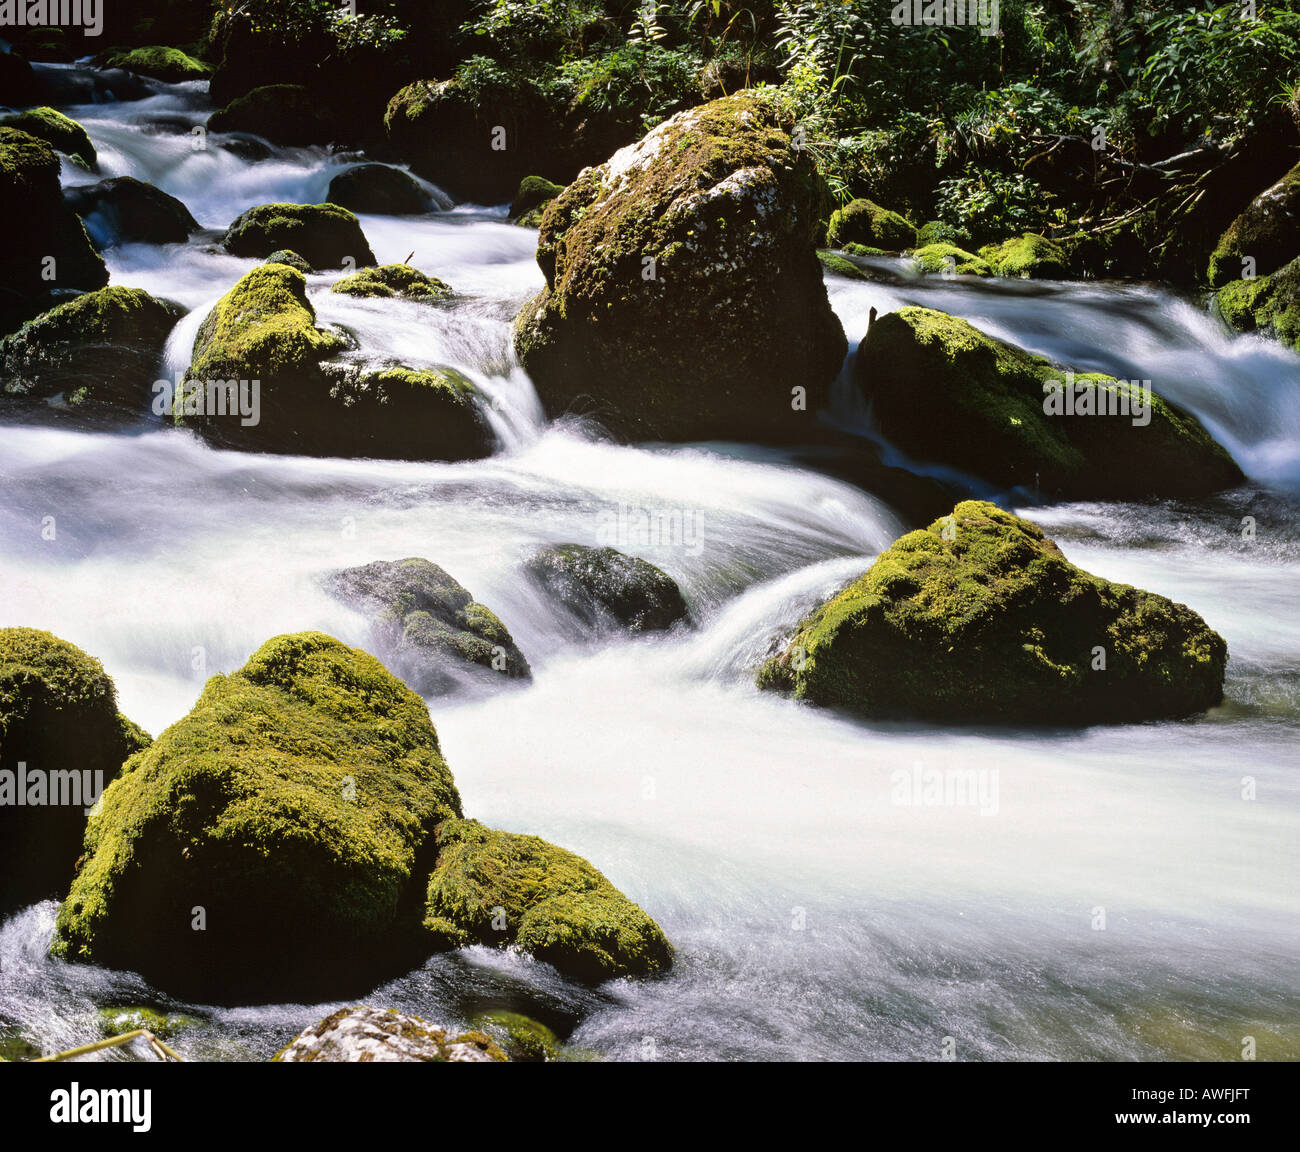 Small waterfall in a mountain stream with moss-covered rocks, movement Stock Photo